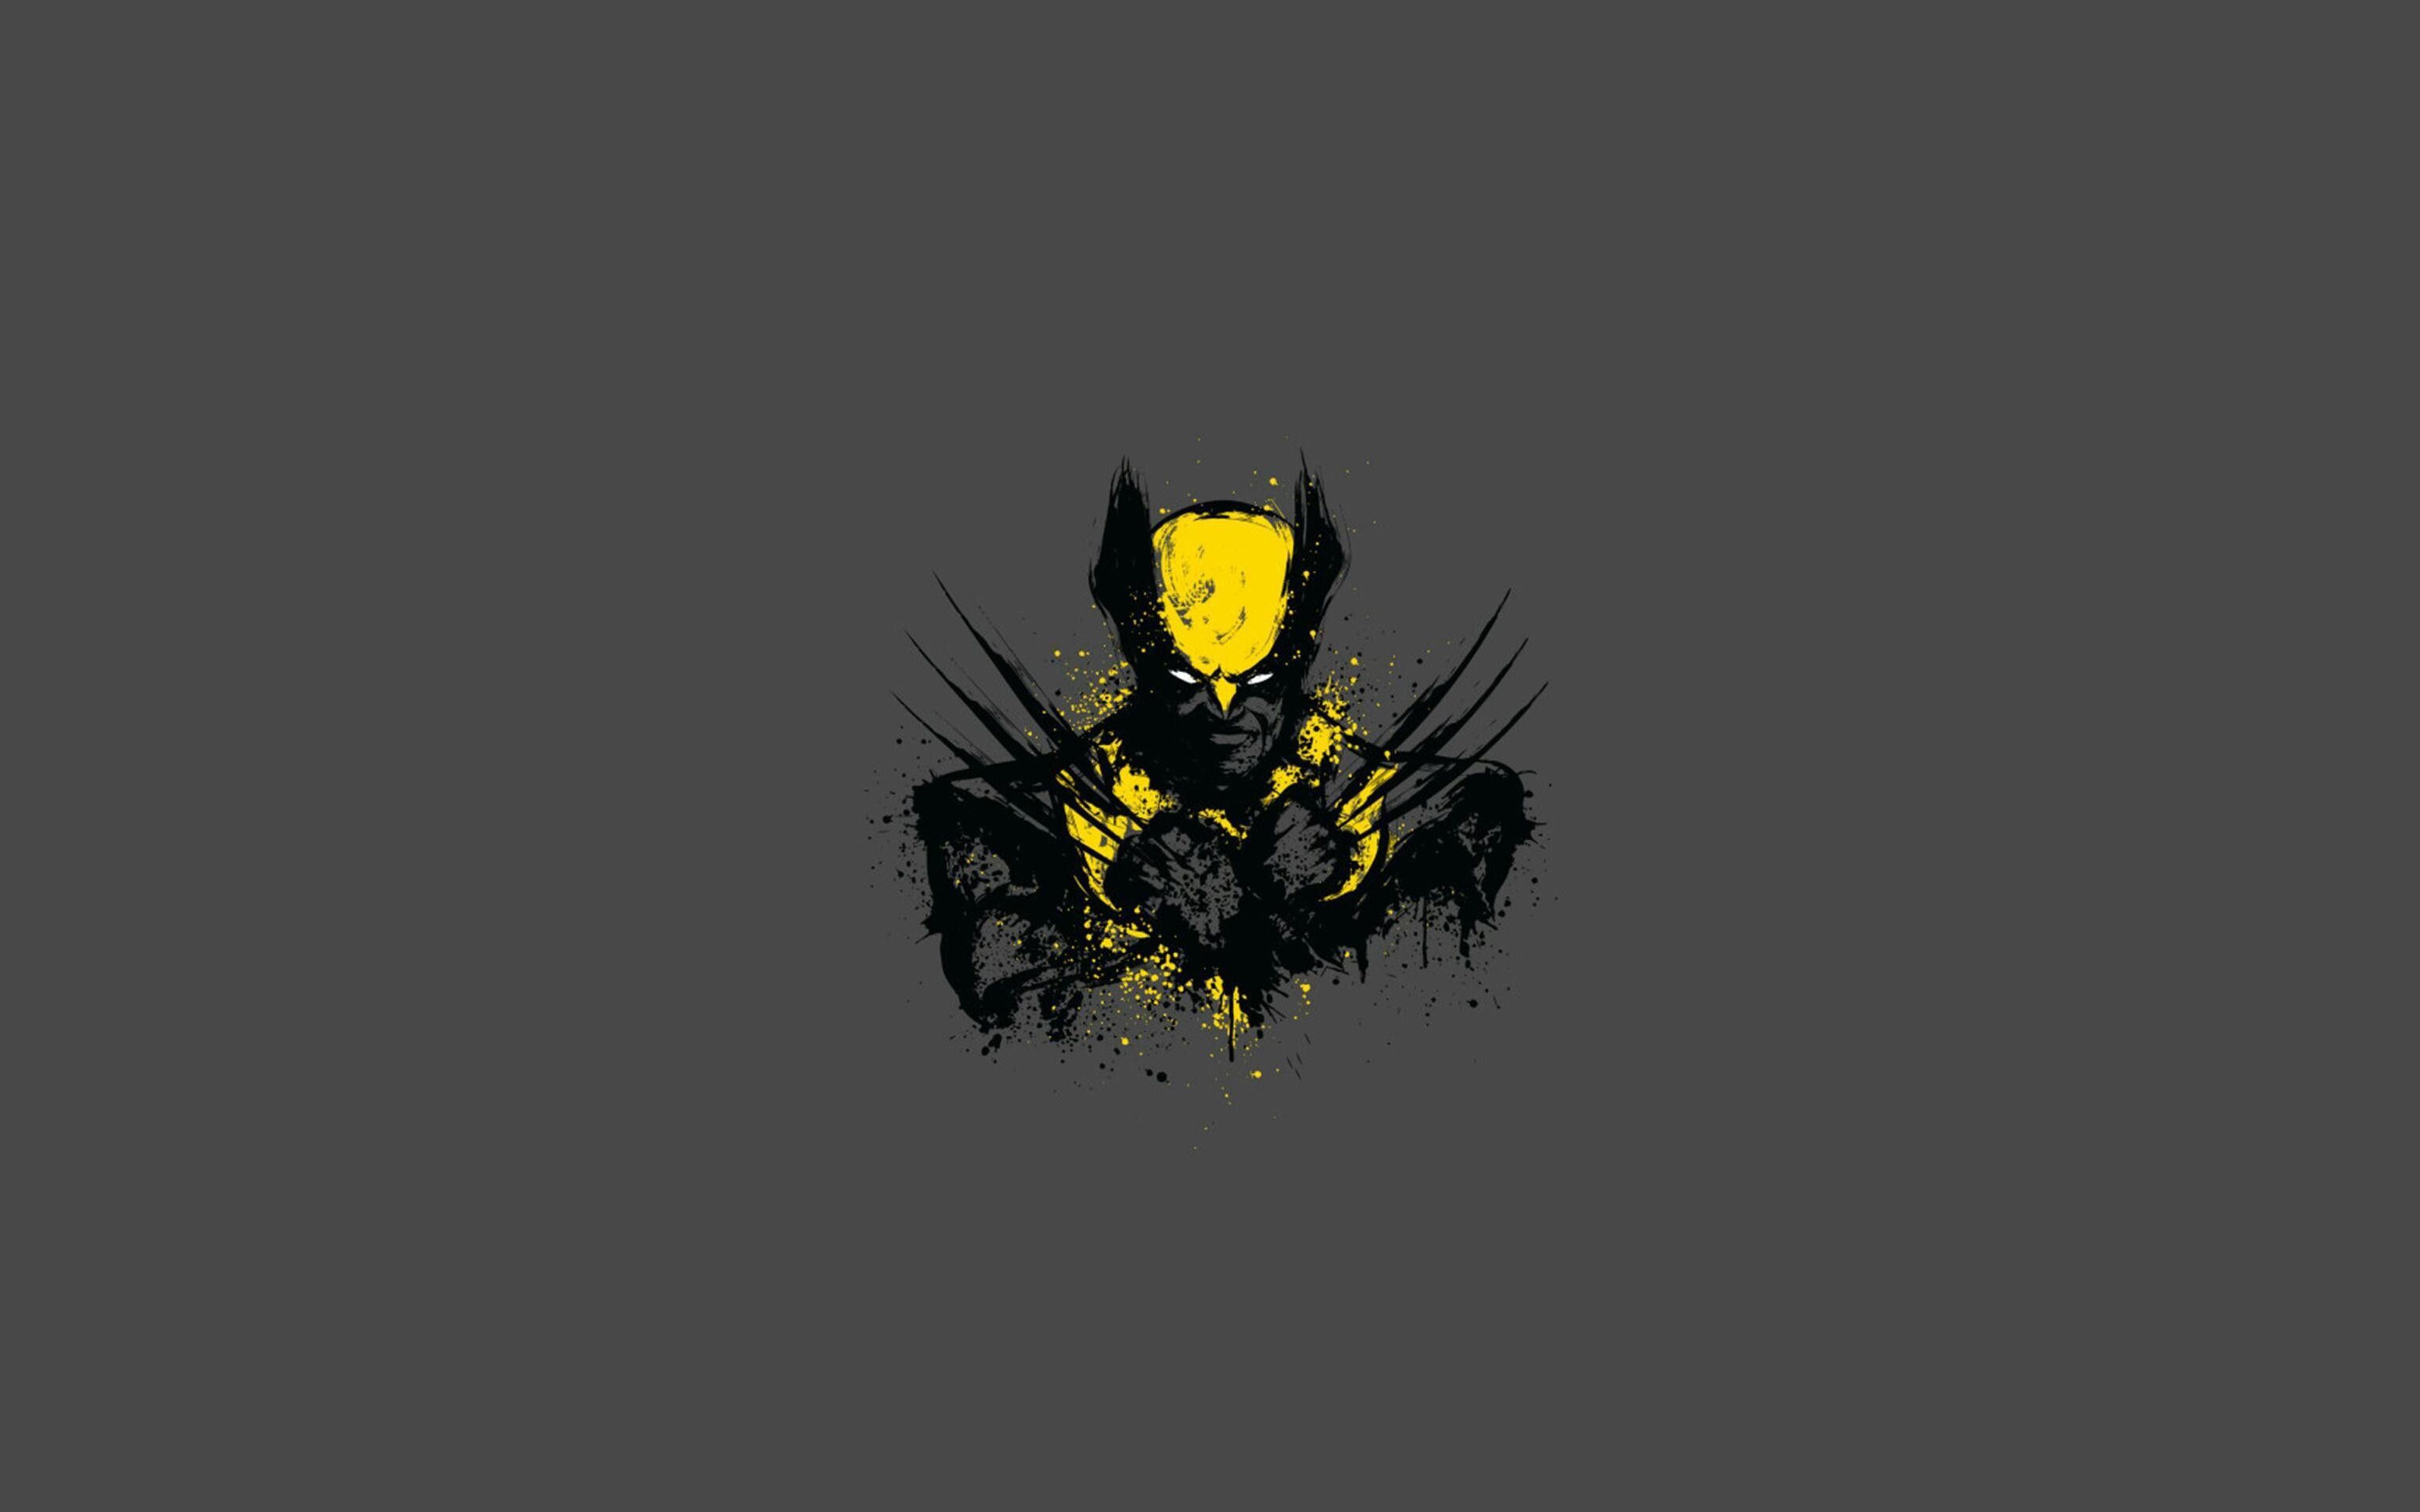 Download wallpaper Logan, 4k, Wolverine, superheroes, James Howlett, minimal, Marvel Comics, gray background for desktop with resolution 3840x2400. High Quality HD picture wallpaper